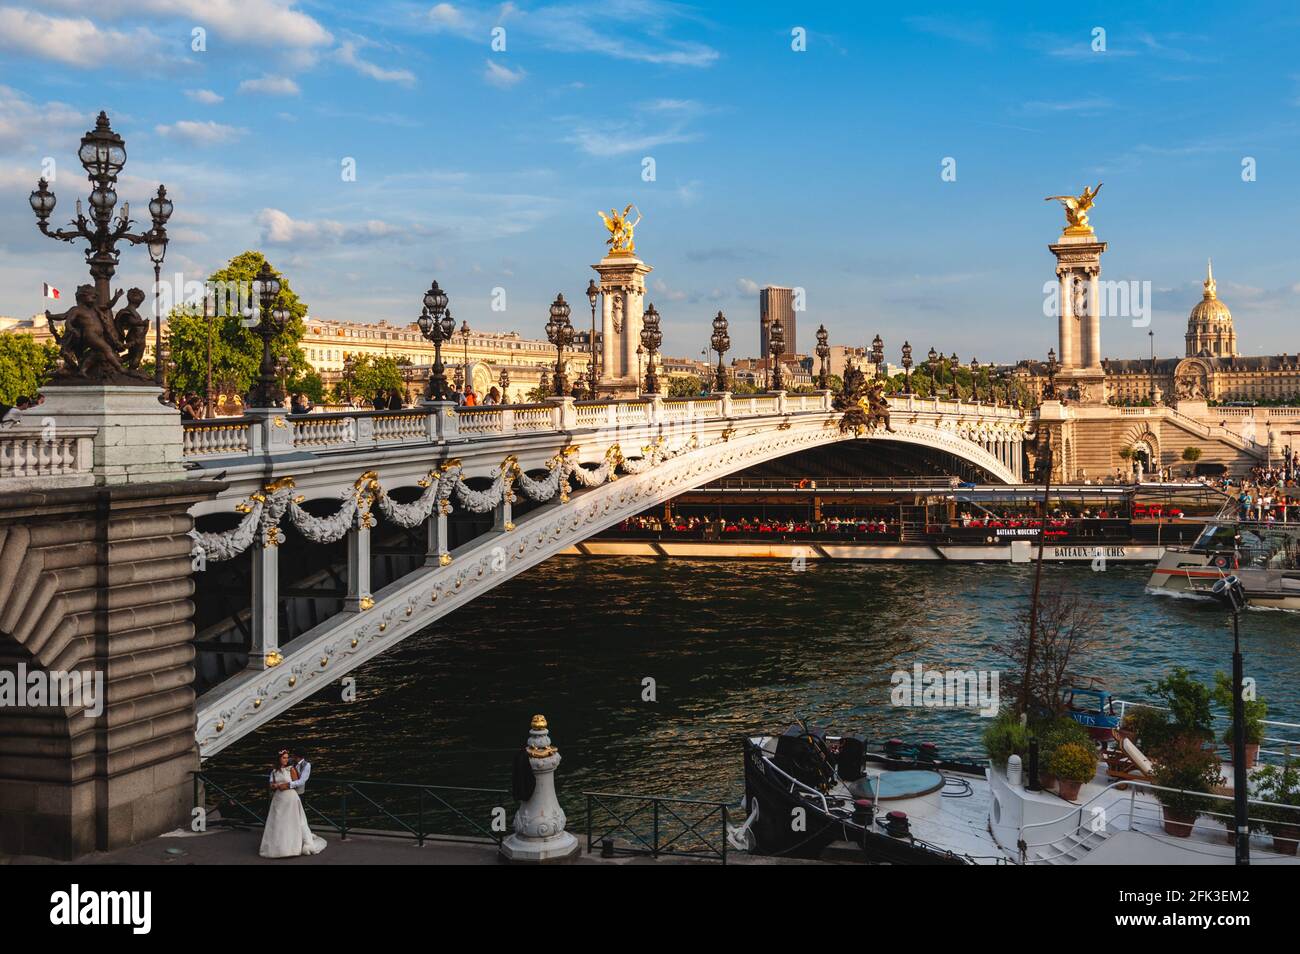 June 14, 2015: Alexandre 3 Bridge, Pont Alexandre III, a deck arch bridge that spans the Seine in Paris, France. It has been classified as a French mo Stock Photo